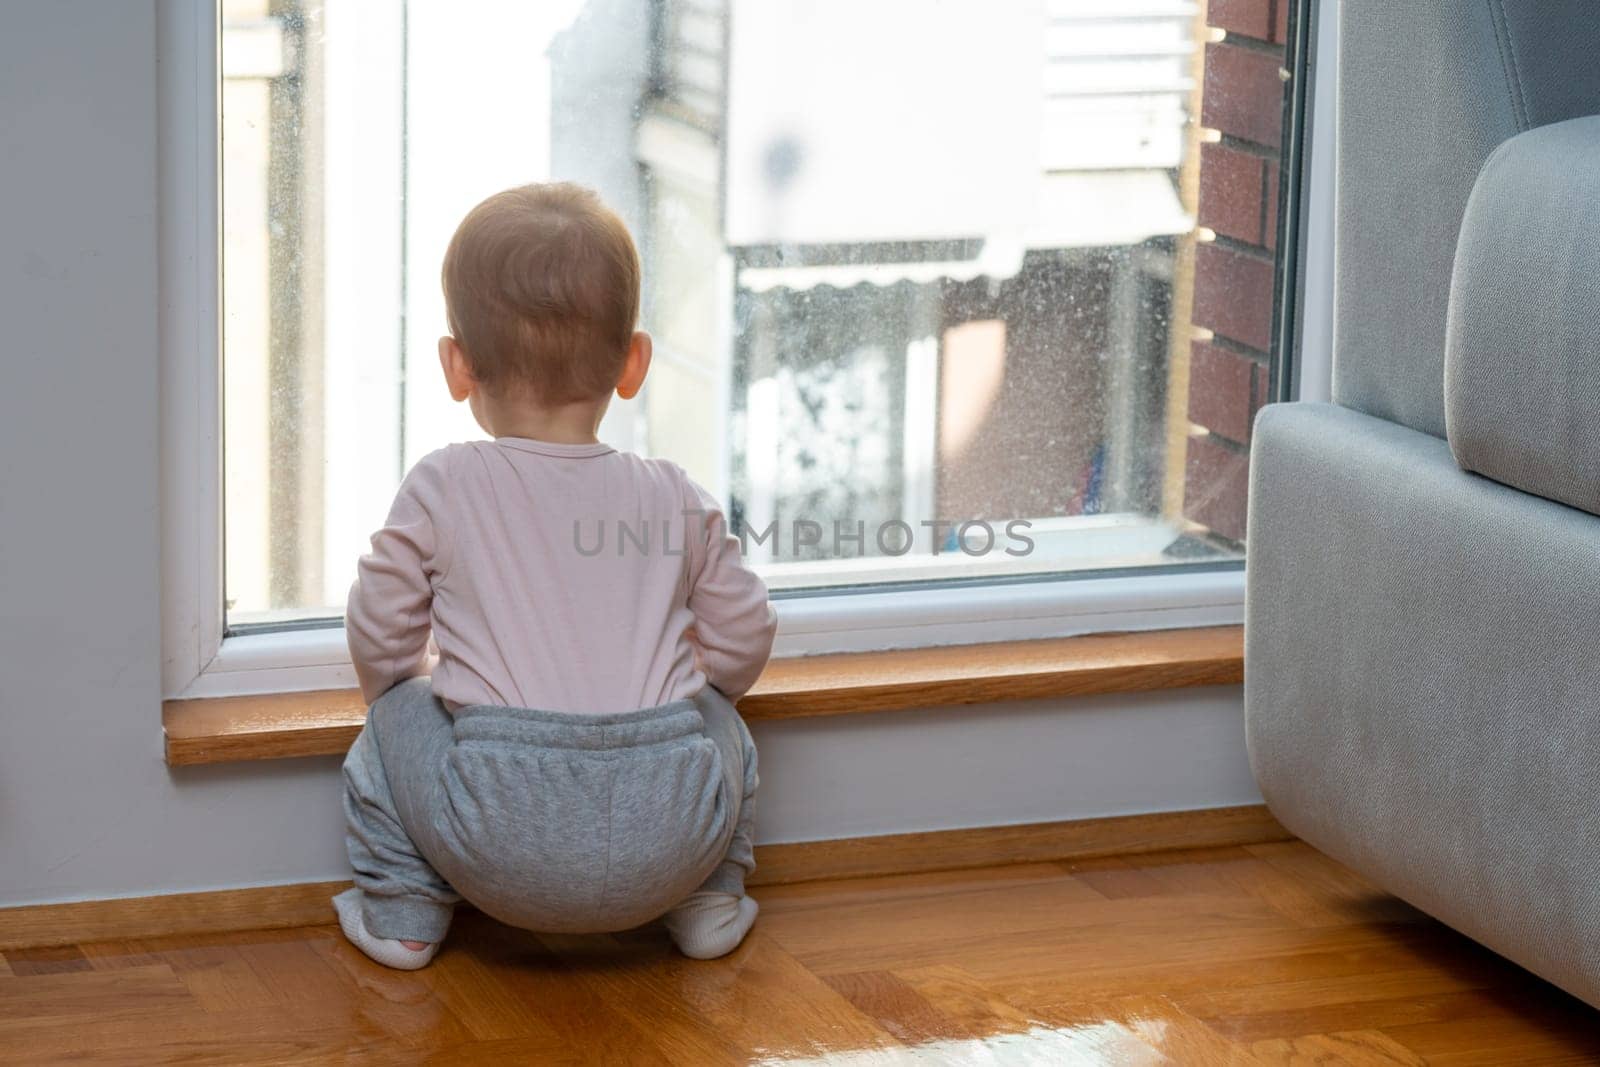 A toddler perches near a window in a home, looking out with longing for their father to come home from work. Concept of enduring love and the bond between child and parent